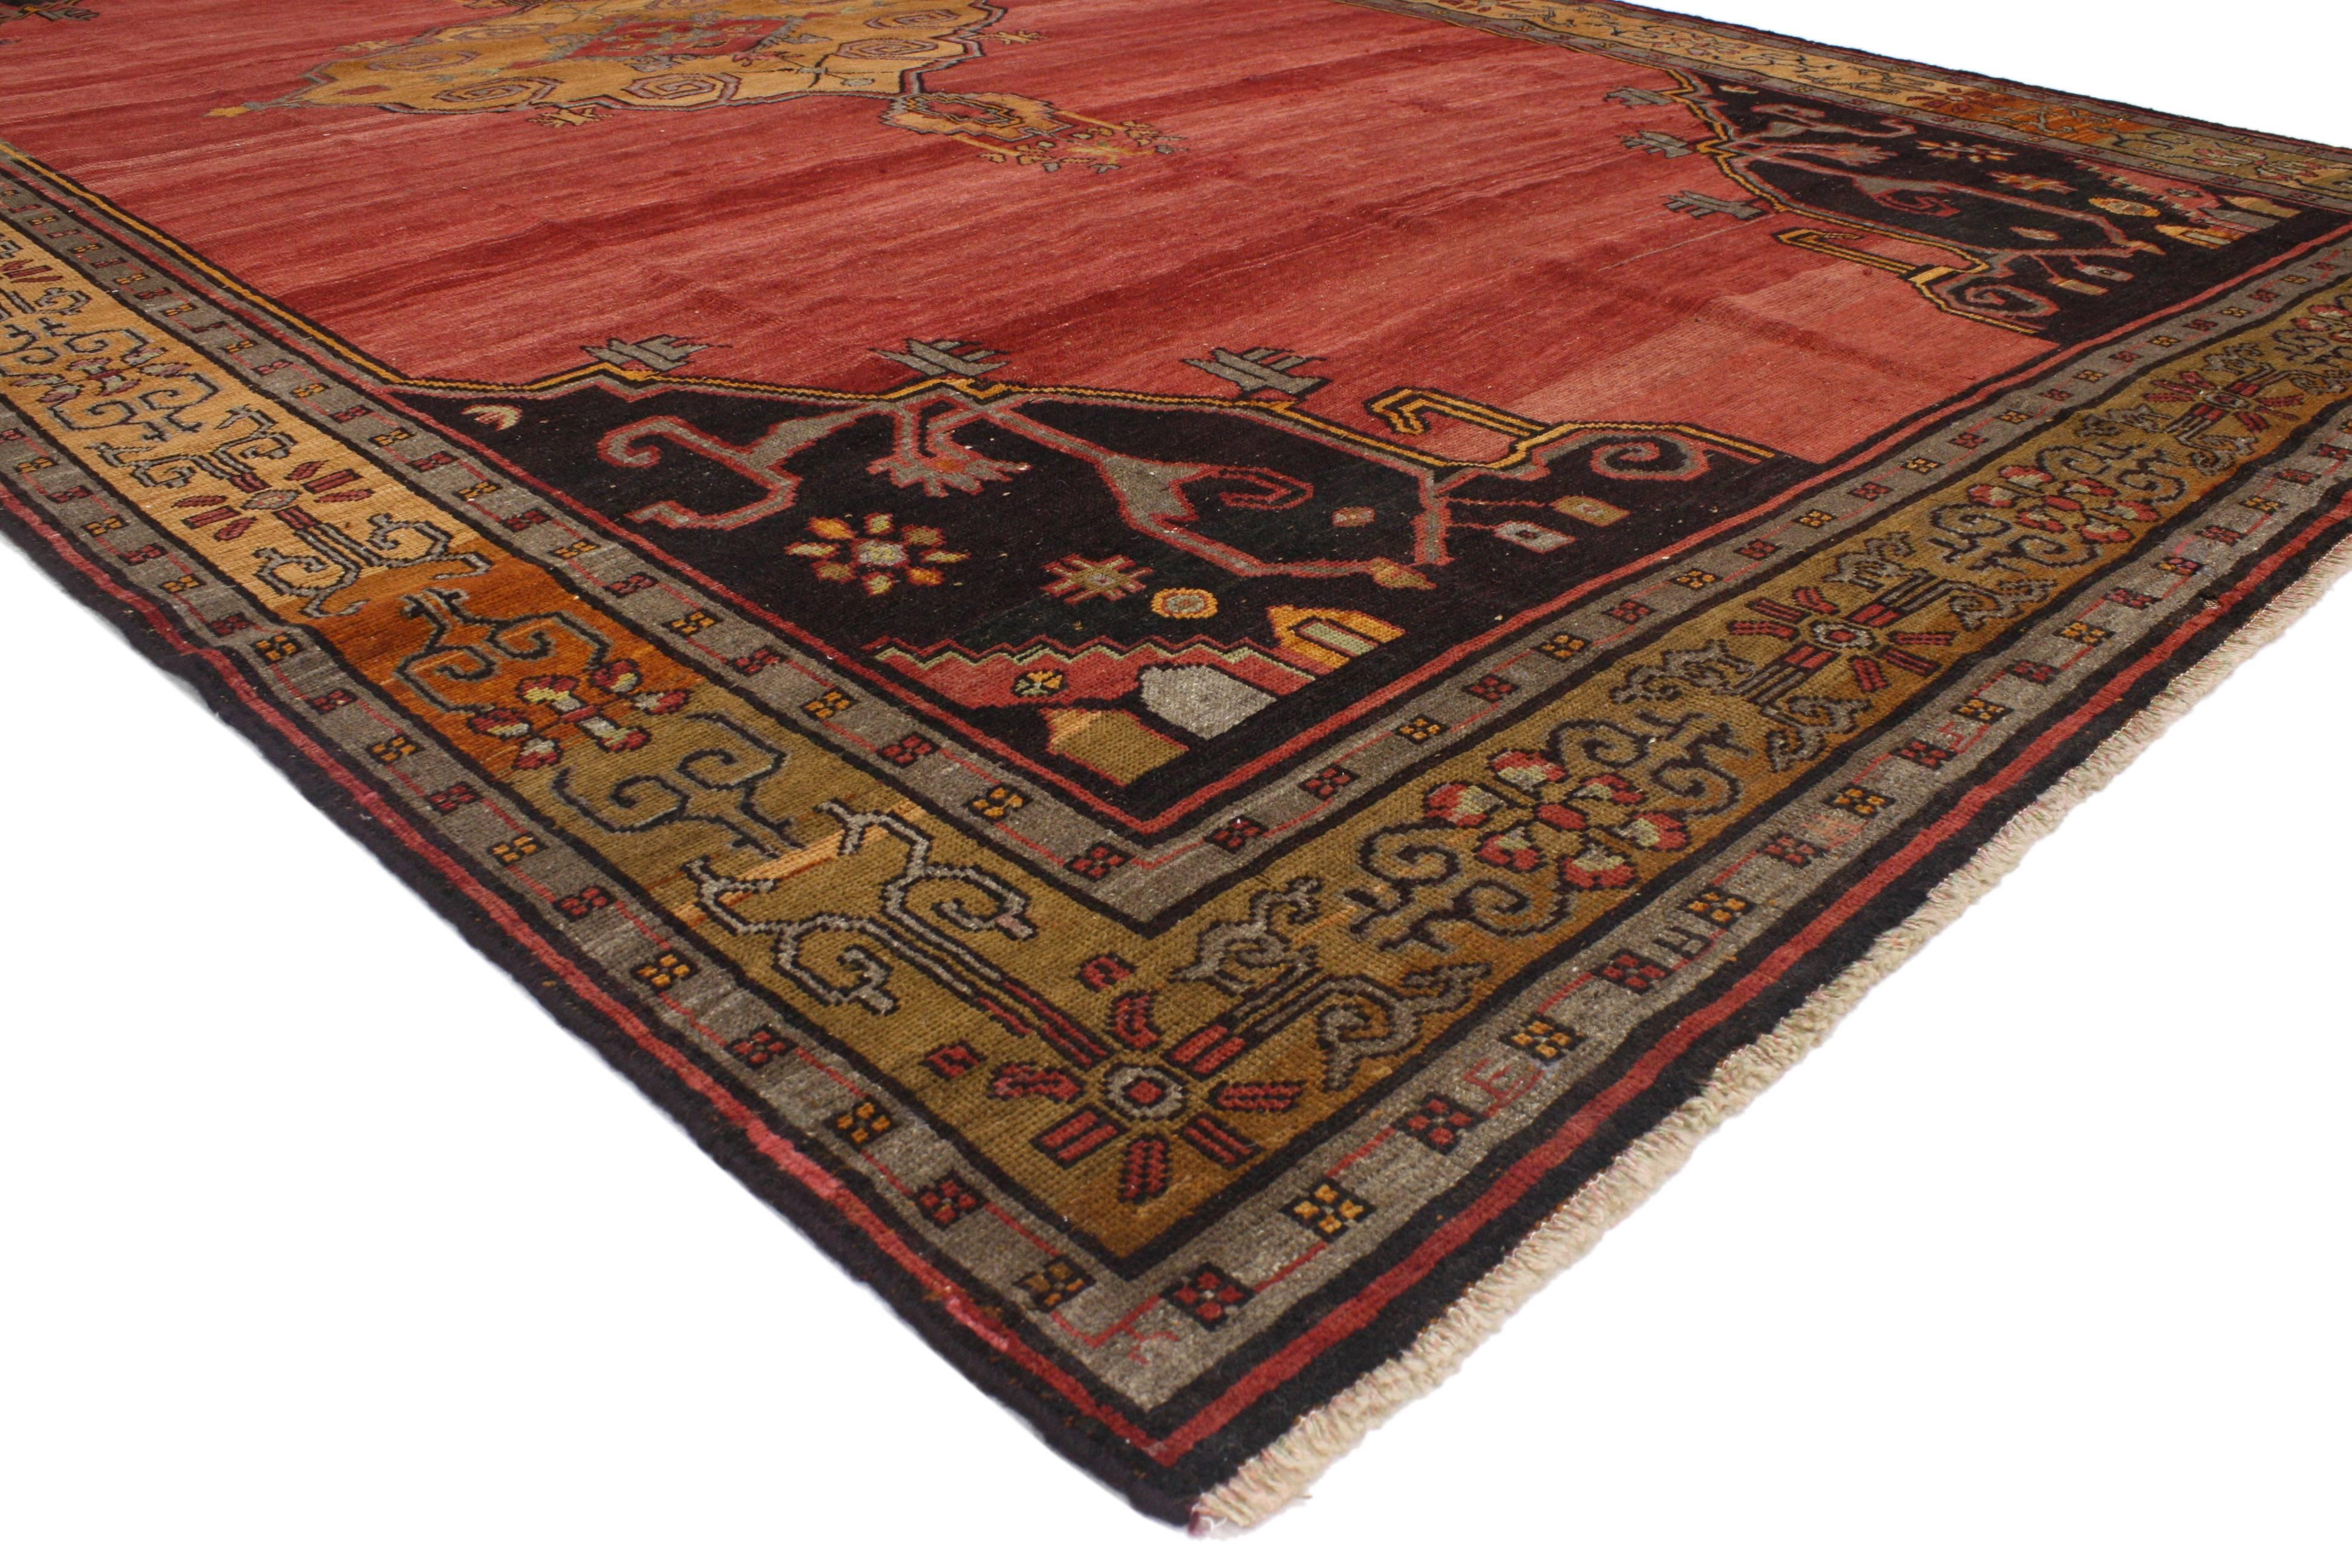 52117 Vintage Turkish Red Oushak Rug with Italian Jacobean Style 08'03 x 12'02. With its striking appeal and saturated color palette, this hand-knotted wool vintage Turkish Oushak rug appears like a sumptuous Italian velvet, recalling the rich and